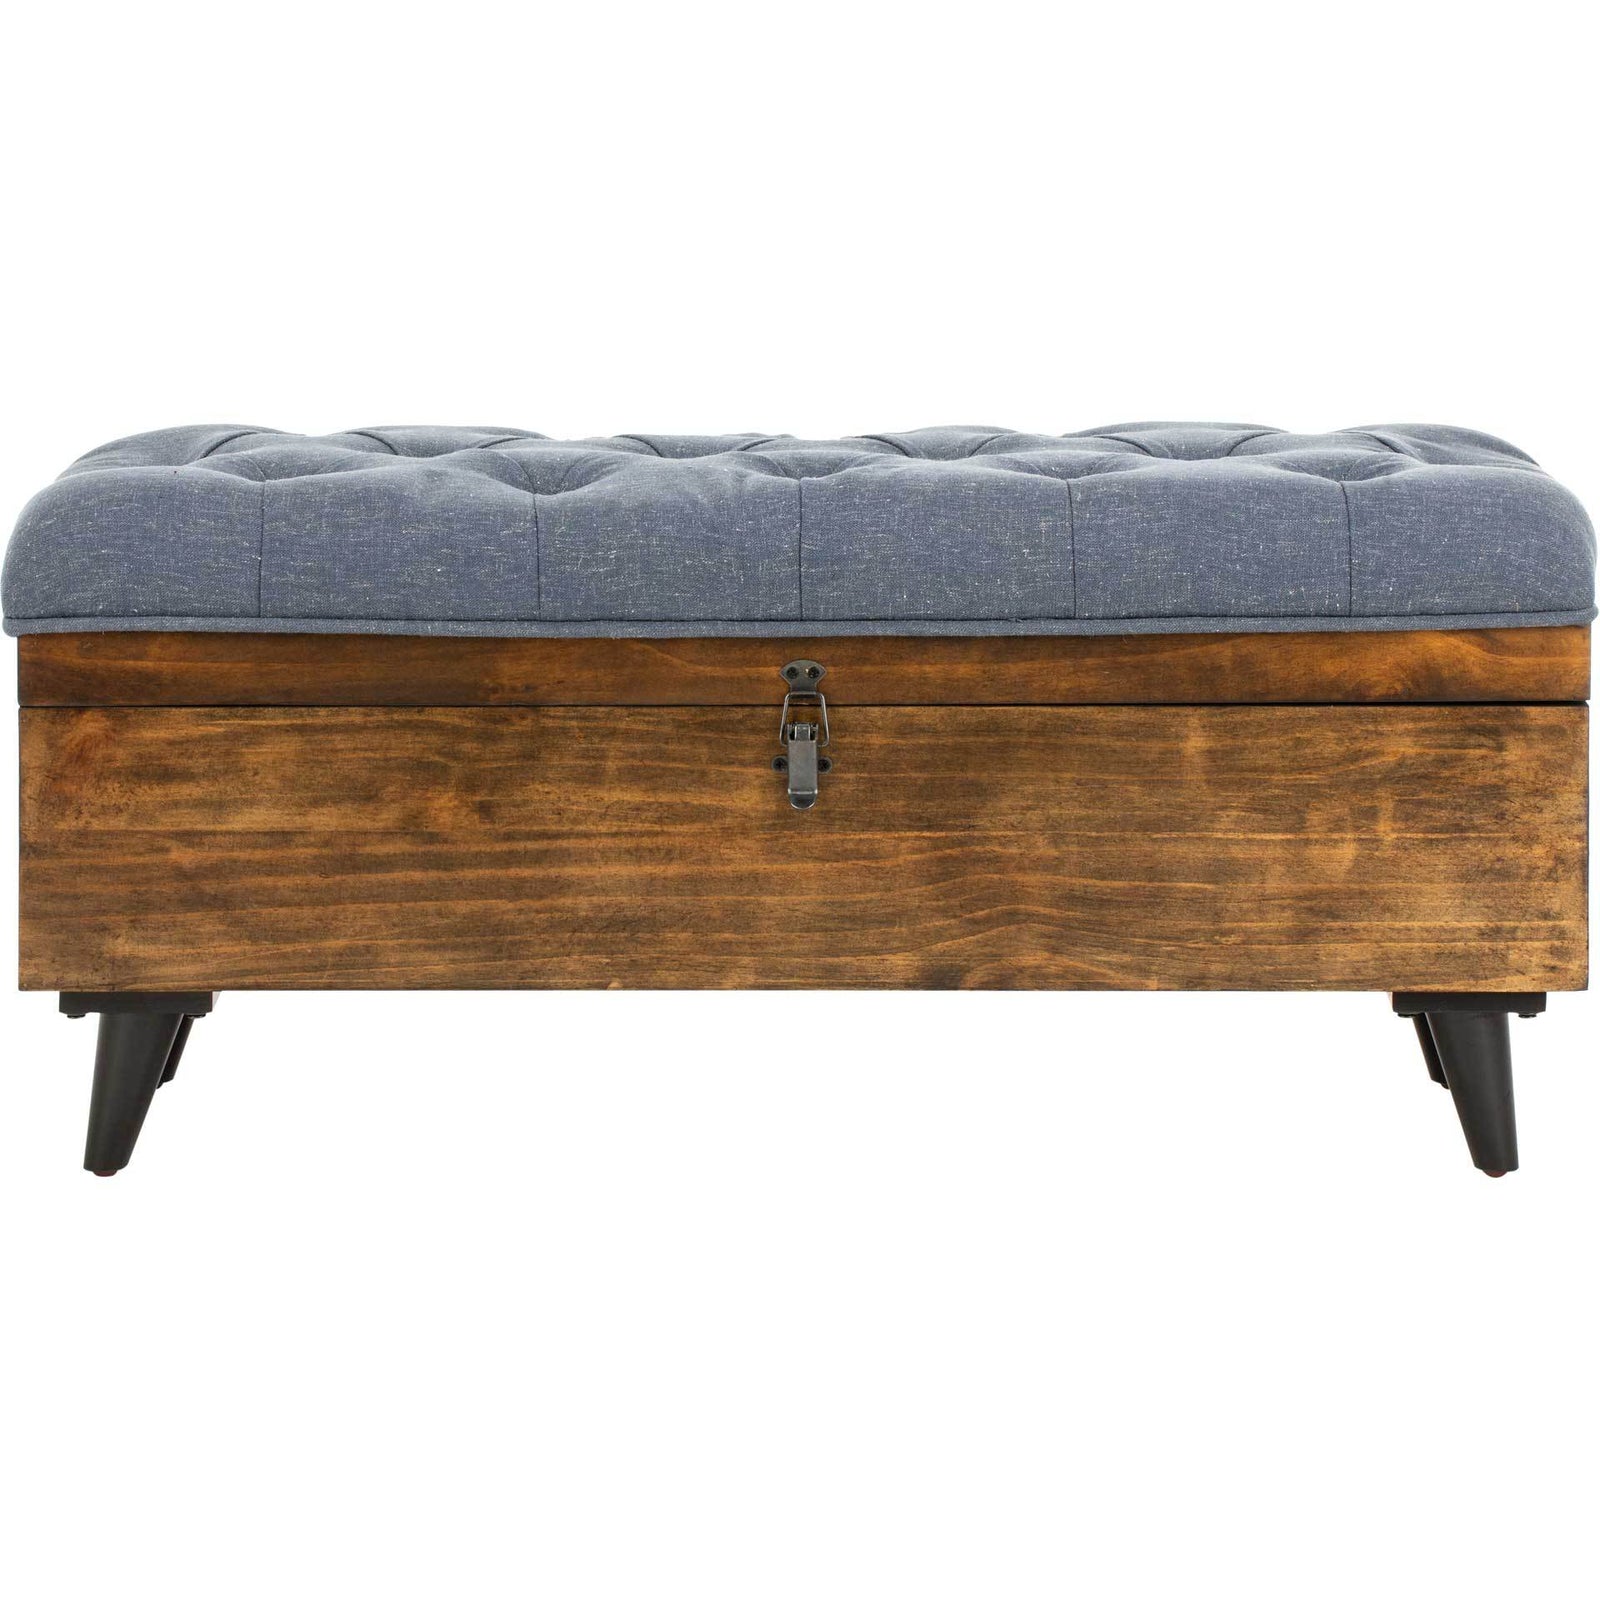 Lily Tufted Cocktail Ottoman